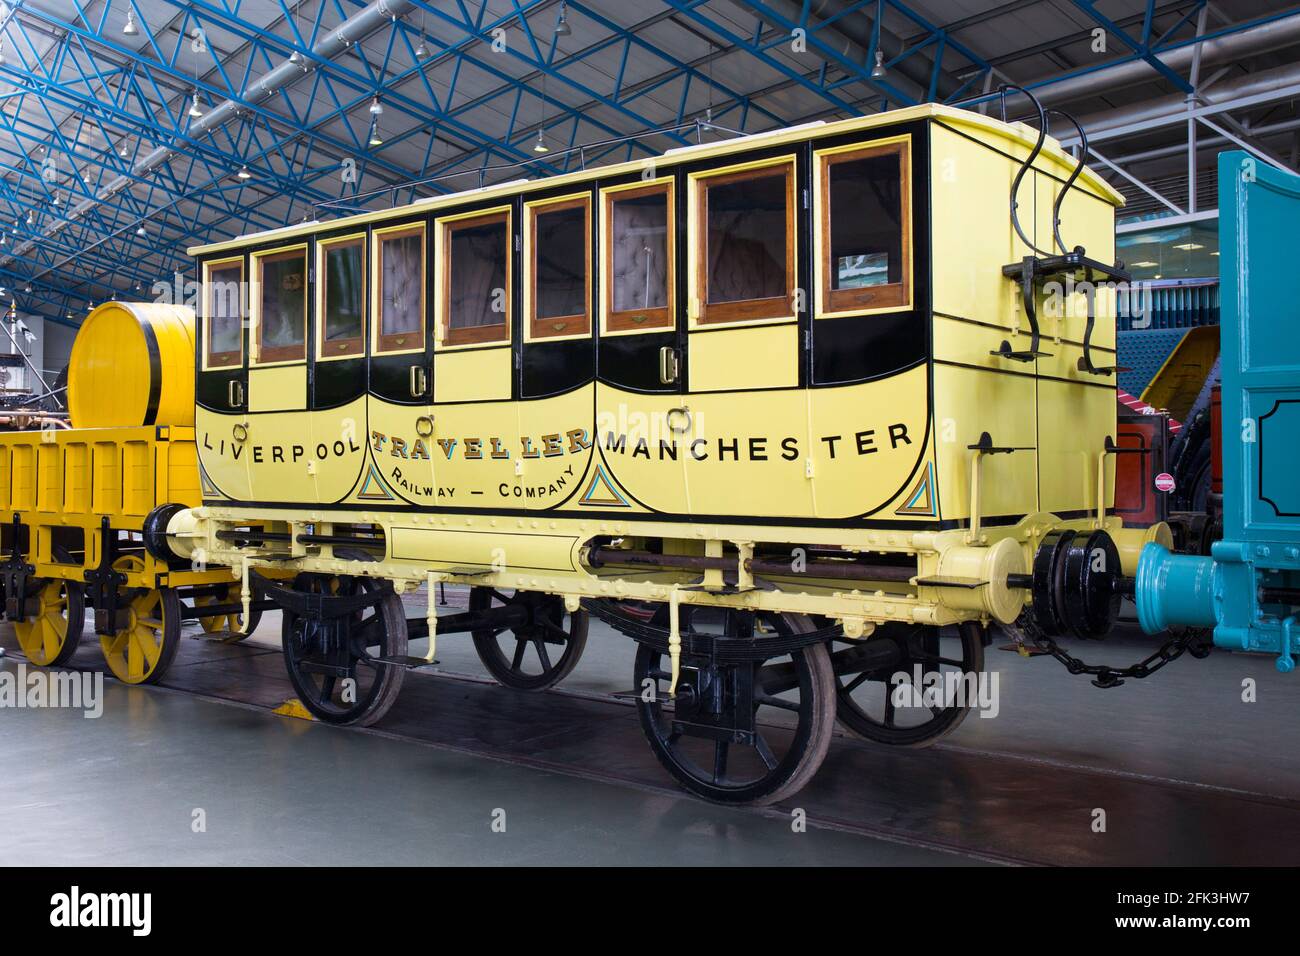 York, North Yorkshire, England. Replica of a vintage L&MR railway carriage, Traveller, on display at the National Railway Museum. Stock Photo